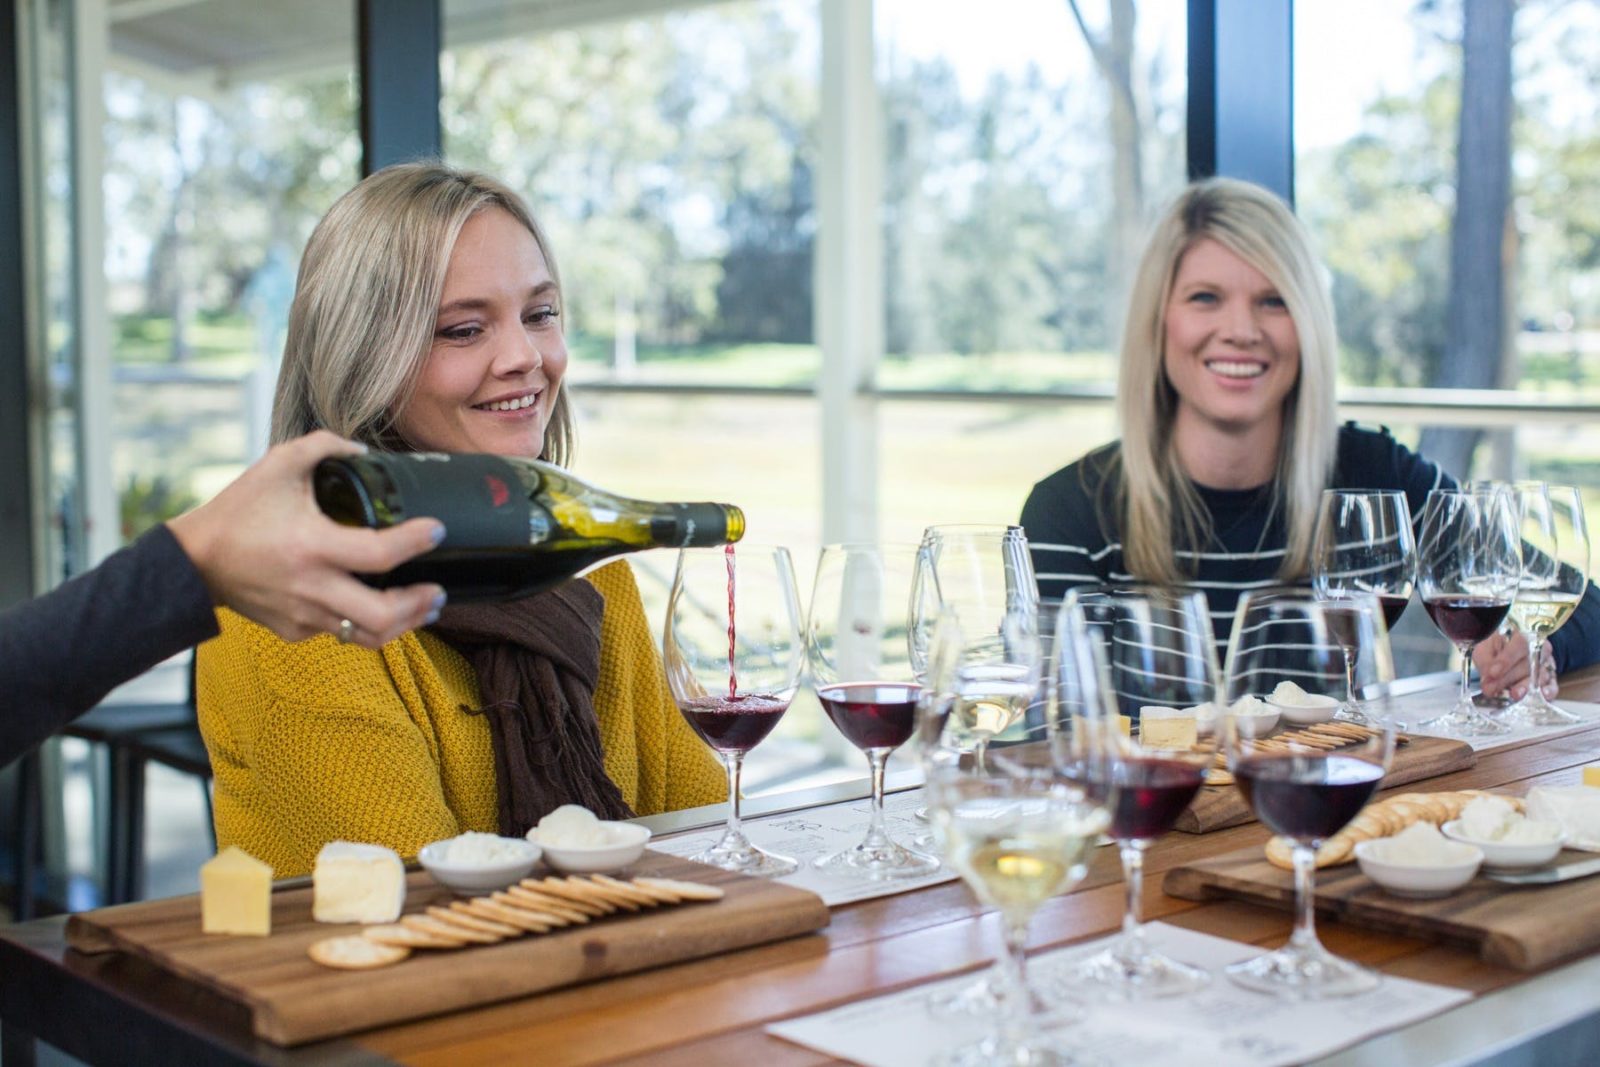 Wine lovers enjoying a cheese and wine experience